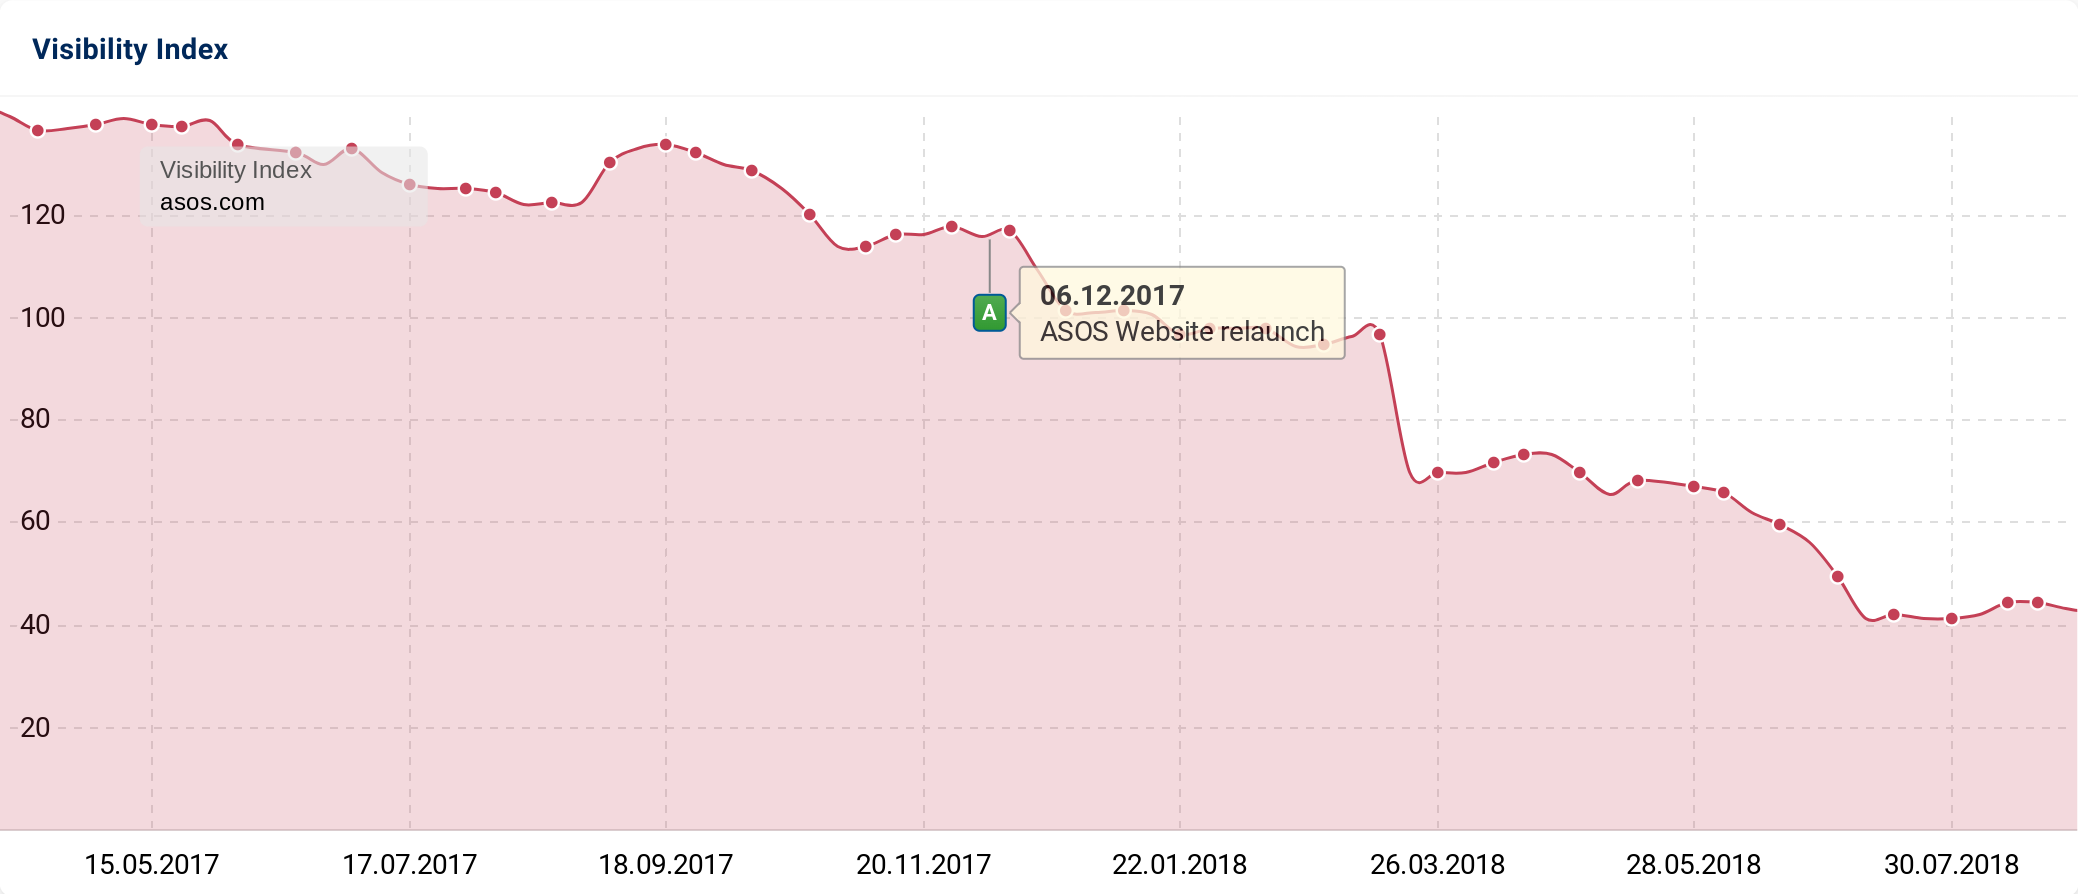 The visibility history of the domain asos.com. At the beginning of December 2017, the domain lost about 15 percent of its visibility.